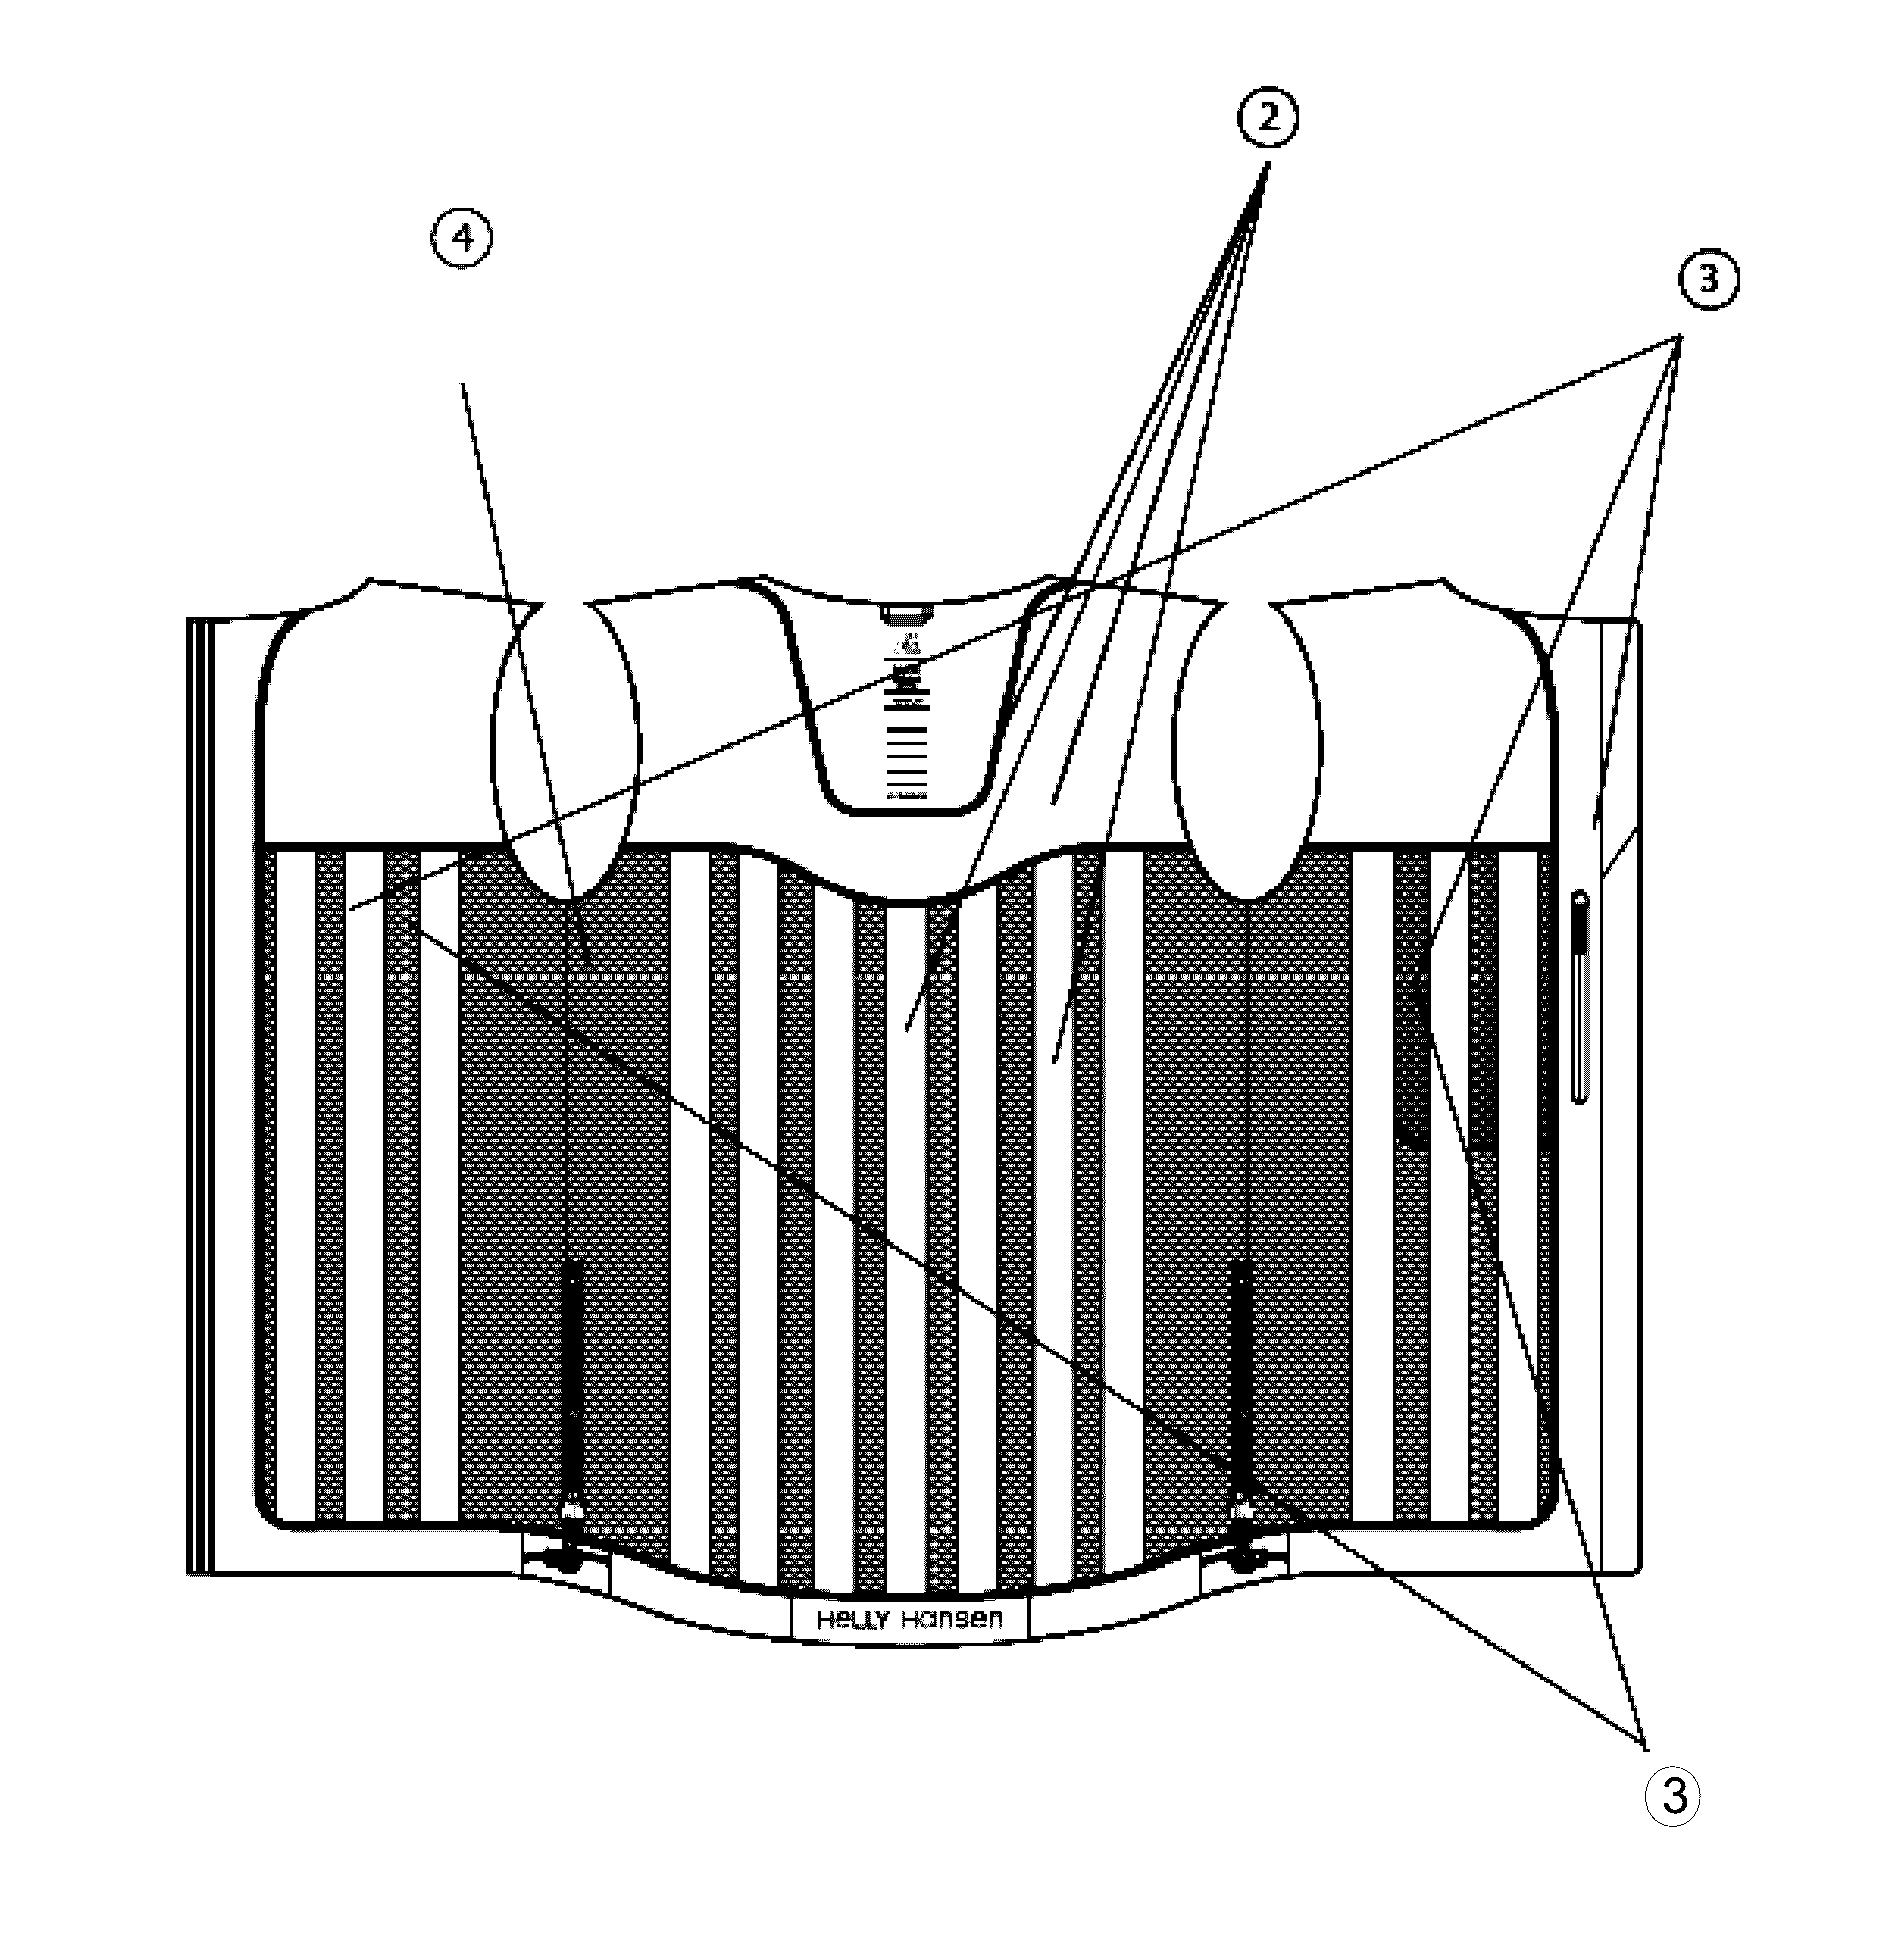 Garment with an incorporated micro climate system